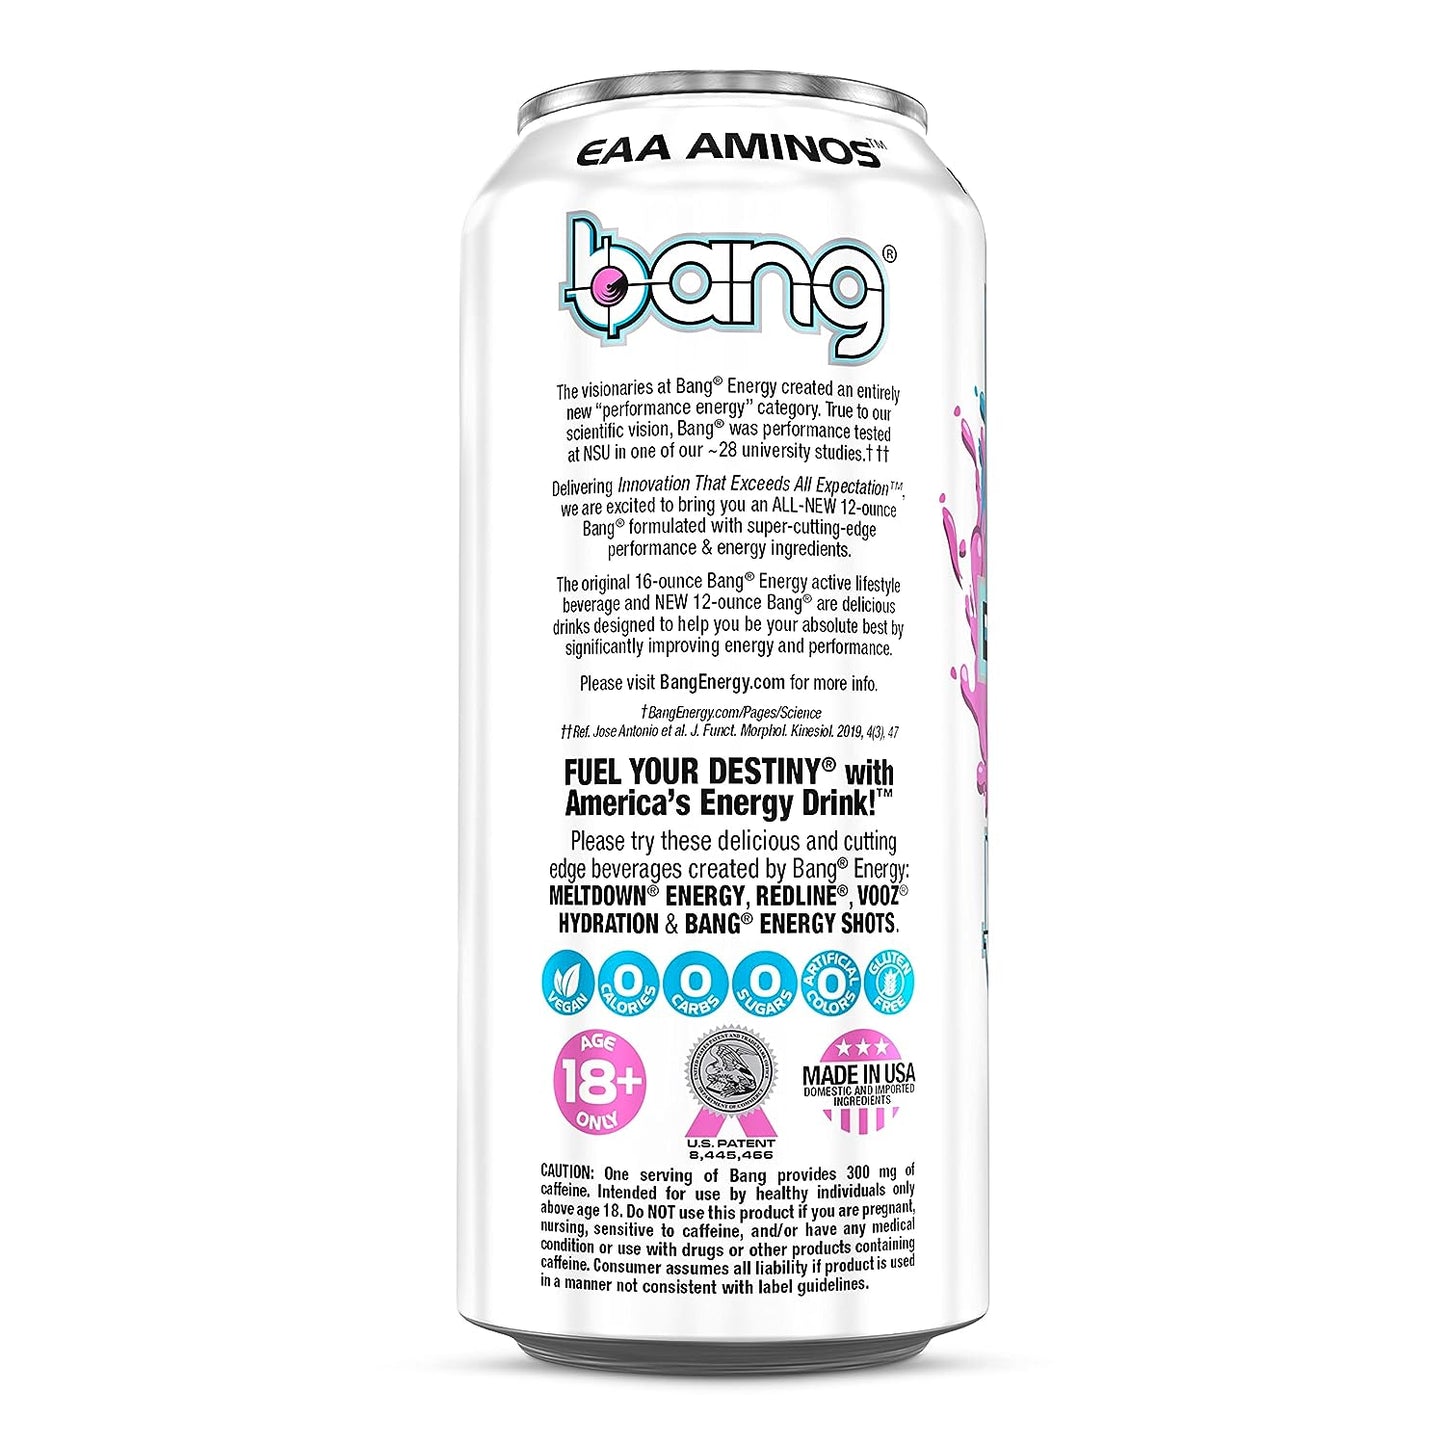 Bang Energy - Cotton Candy Energy Drink 473 ml